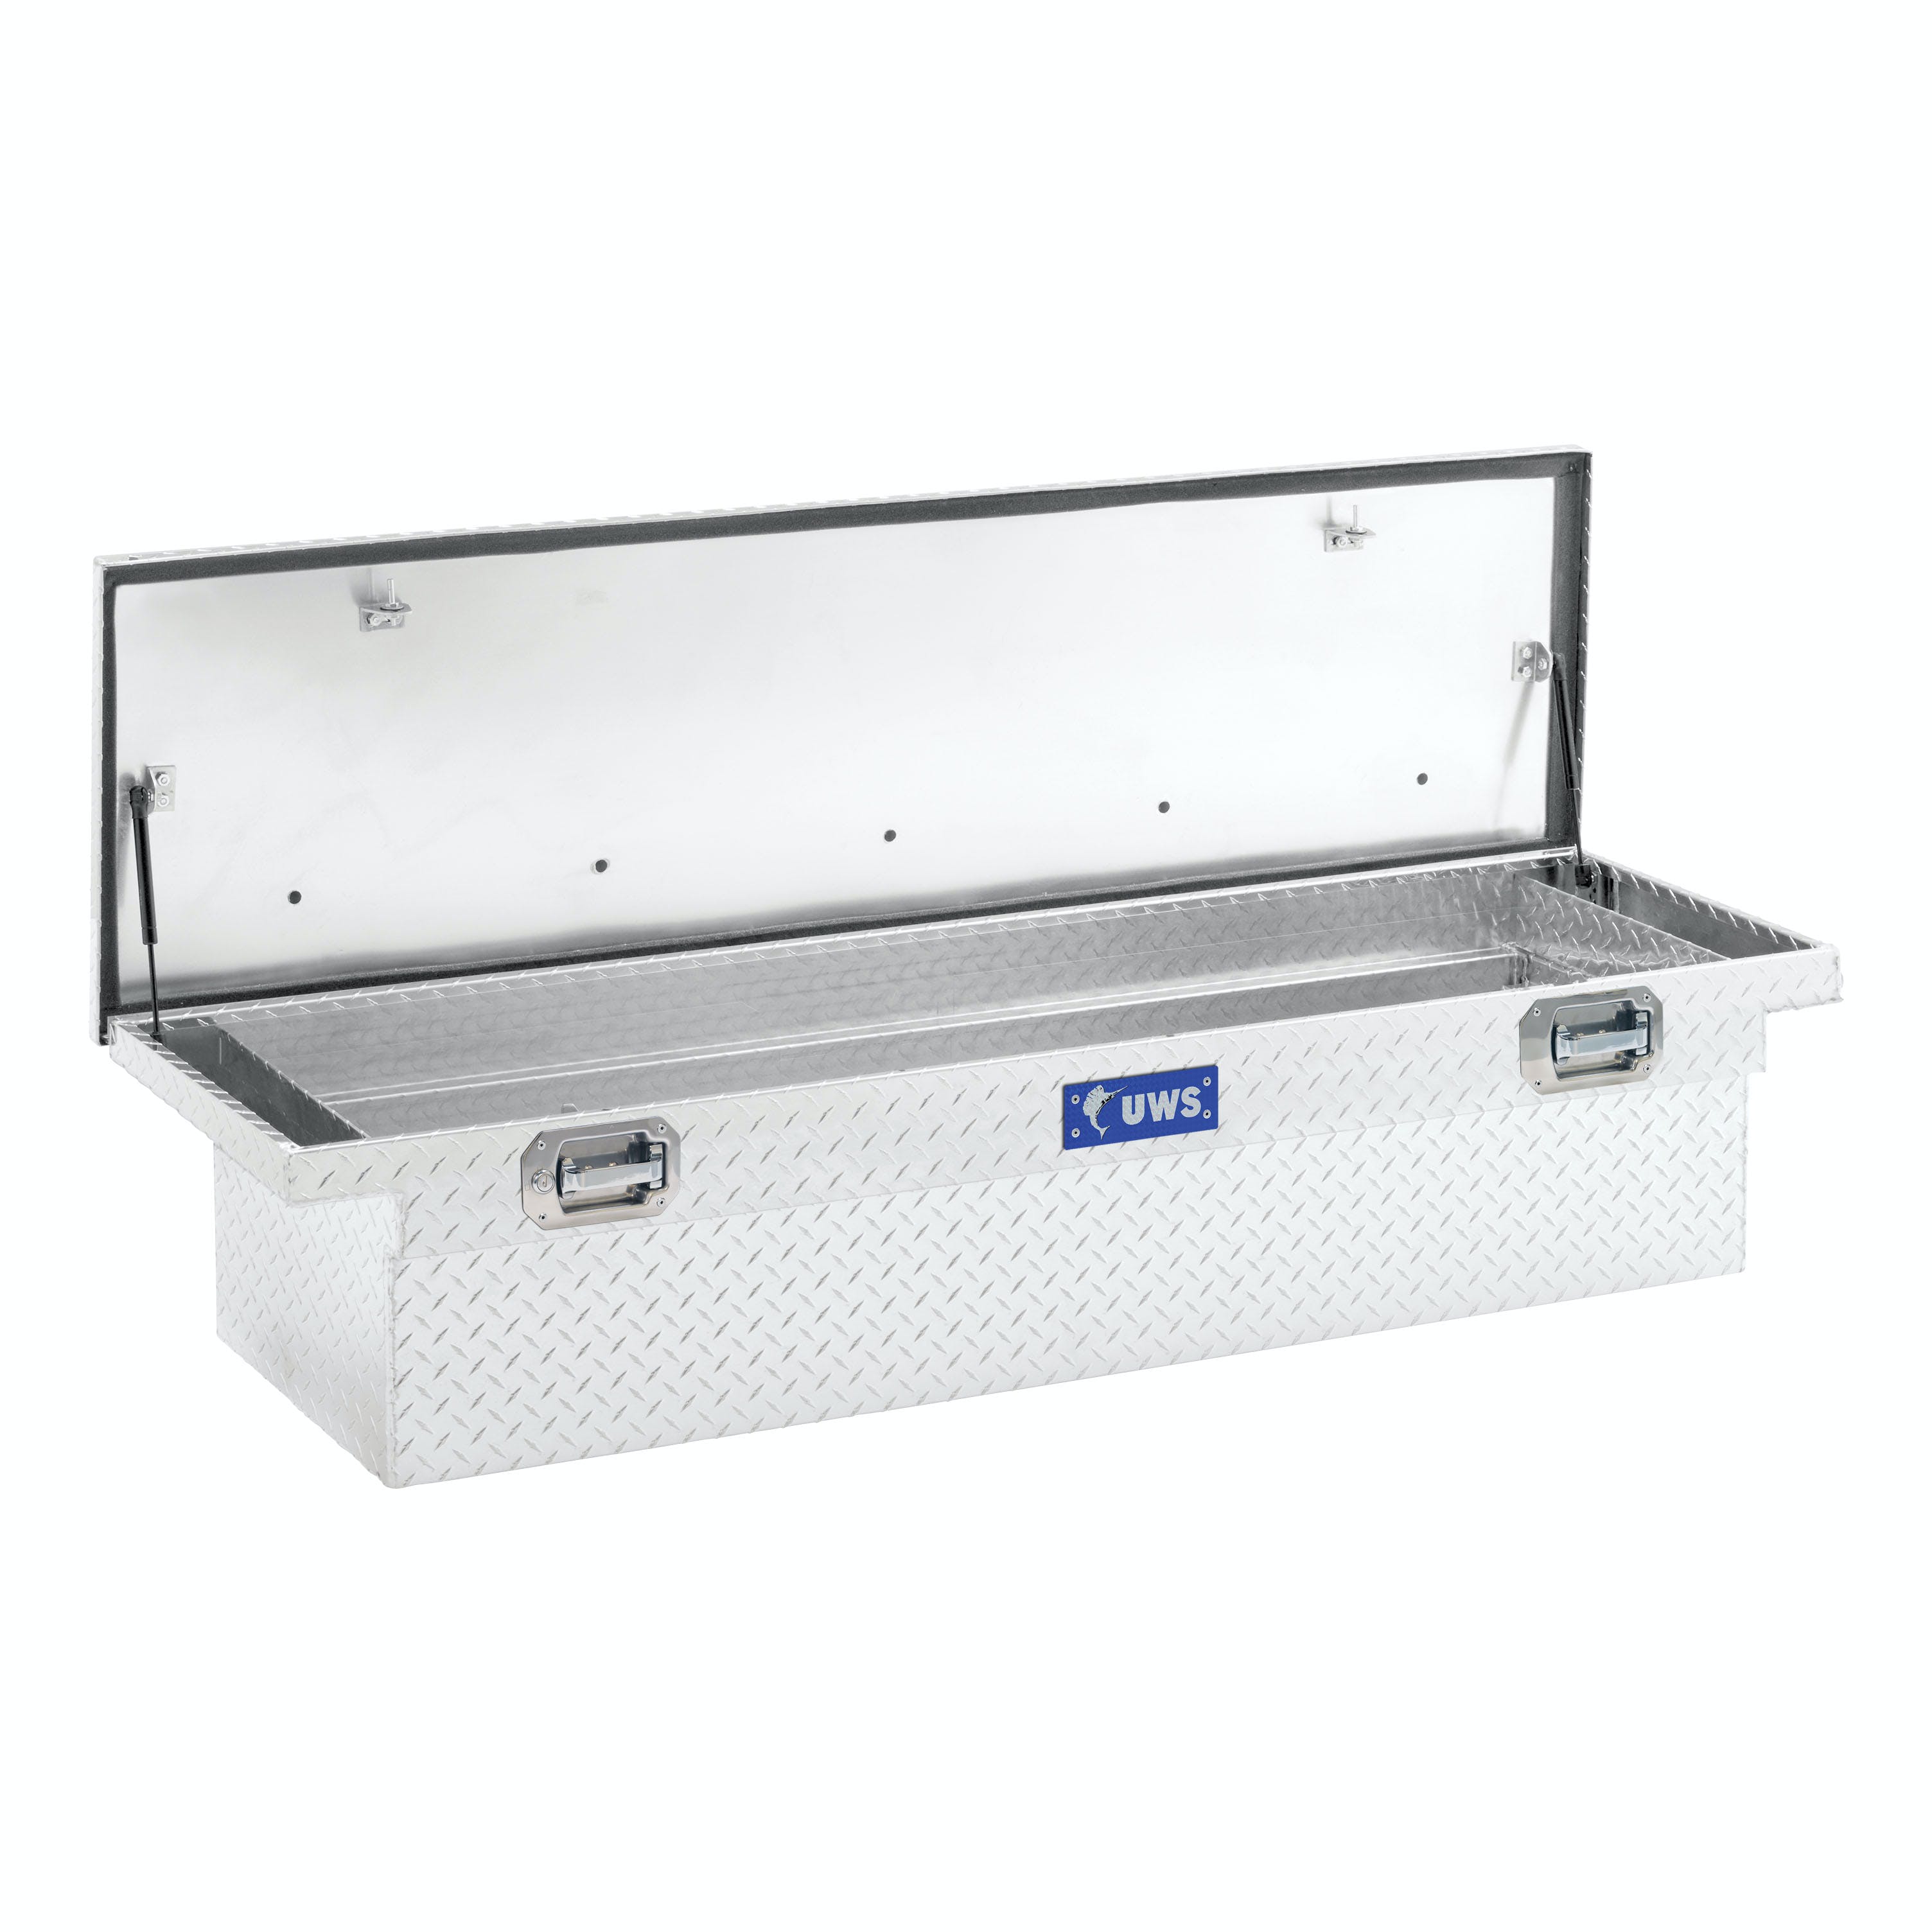 UWS TBS-69-LP-PH 69 inch Aluminum Single Lid Crossover Toolbox Pull Handle Low Profile